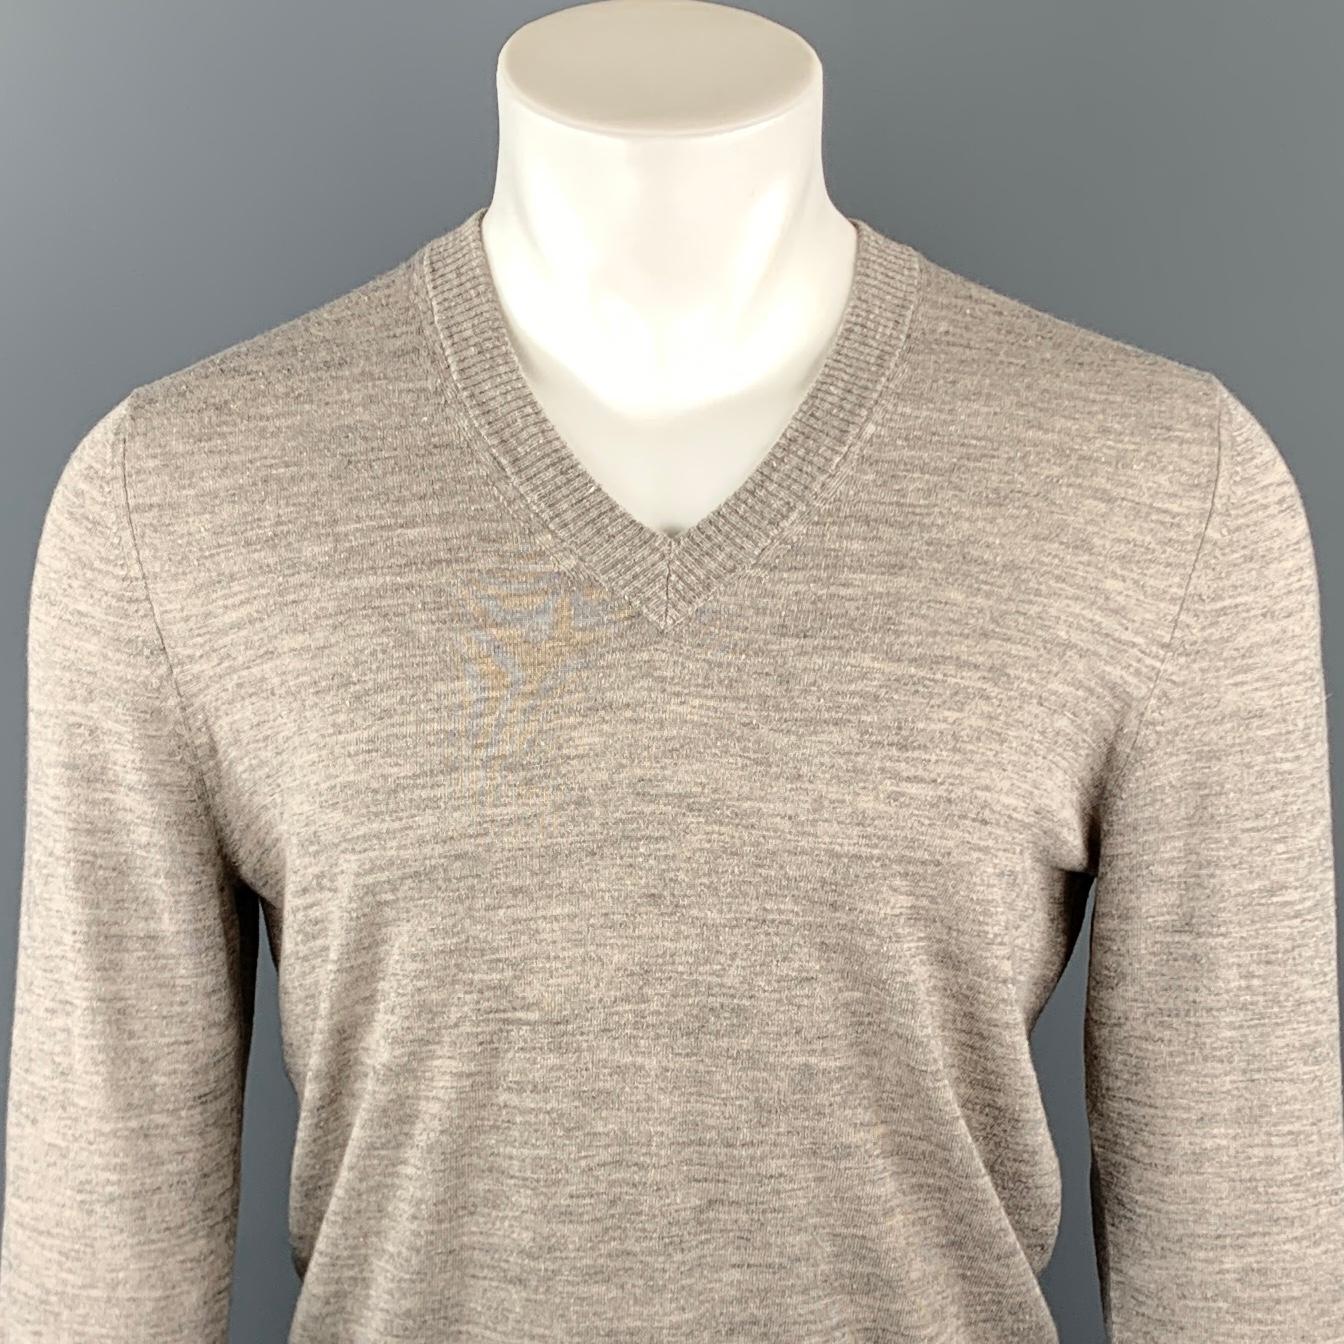 MAISON MARGIELA pullover sweater comes in a gray solid cotton blend featuring a ribbed v-neck and leather elbow patch details. Made in Romania.

Excellent Pre-Owned Condition.
Marked: ( No Size Marked )

Measurements:

Shoulder: 16 in. 
Chest: 38